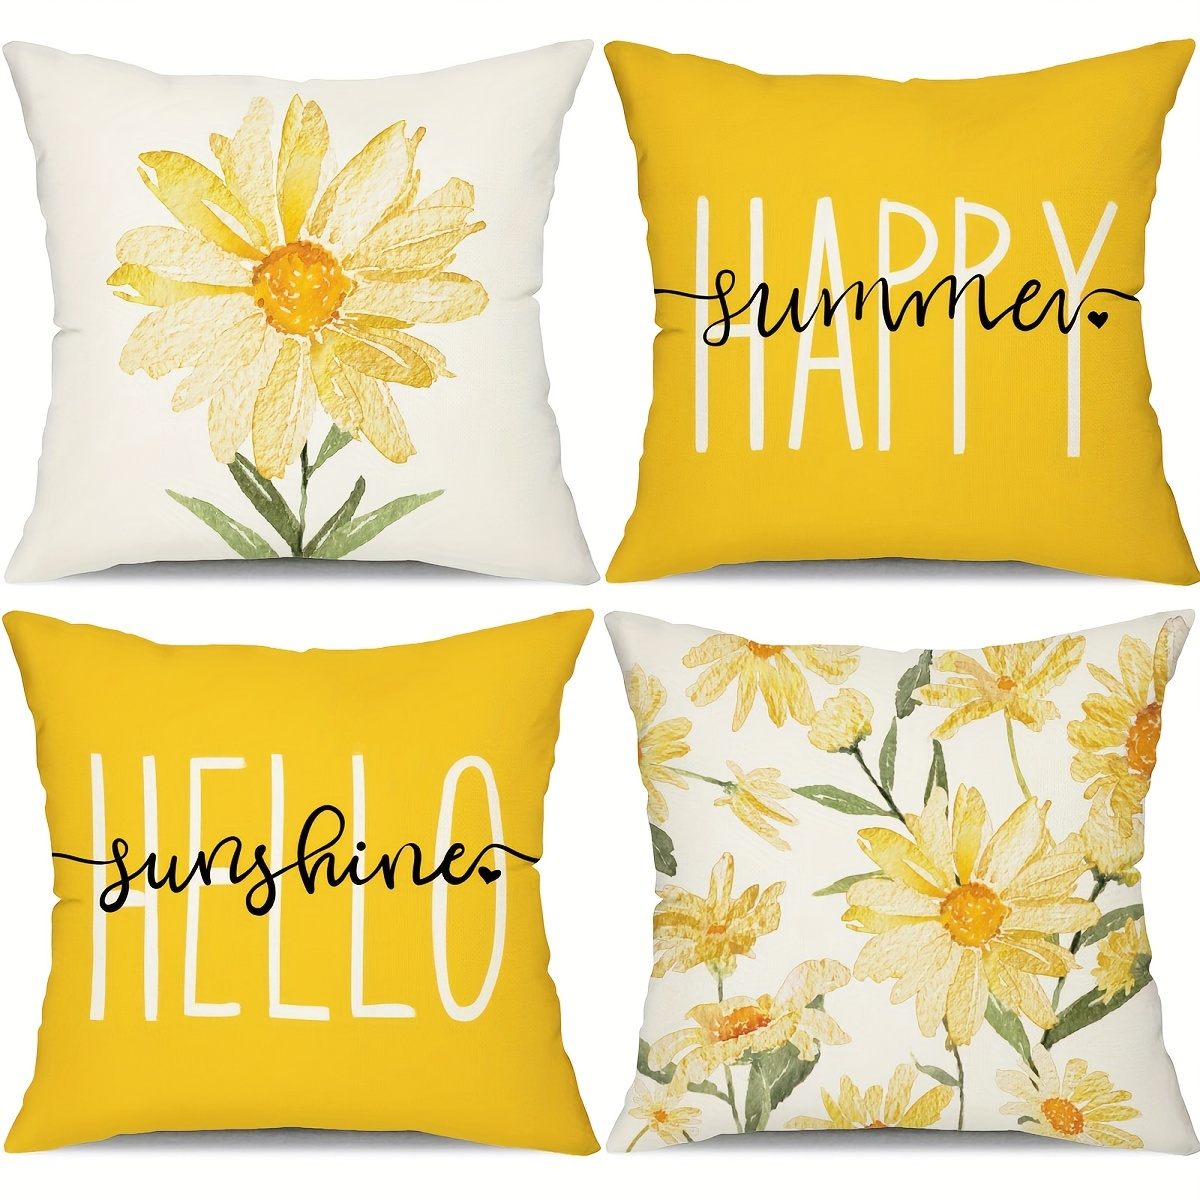 

4pcs/set Summer Flowers Printed Throw Pillow Cover - Soft And Stylish Cushion Pillow Case For Sofa, Bed, Car, And Living Room - Perfect Home Decor And Room Decor Accessory - 45cm X 45cm